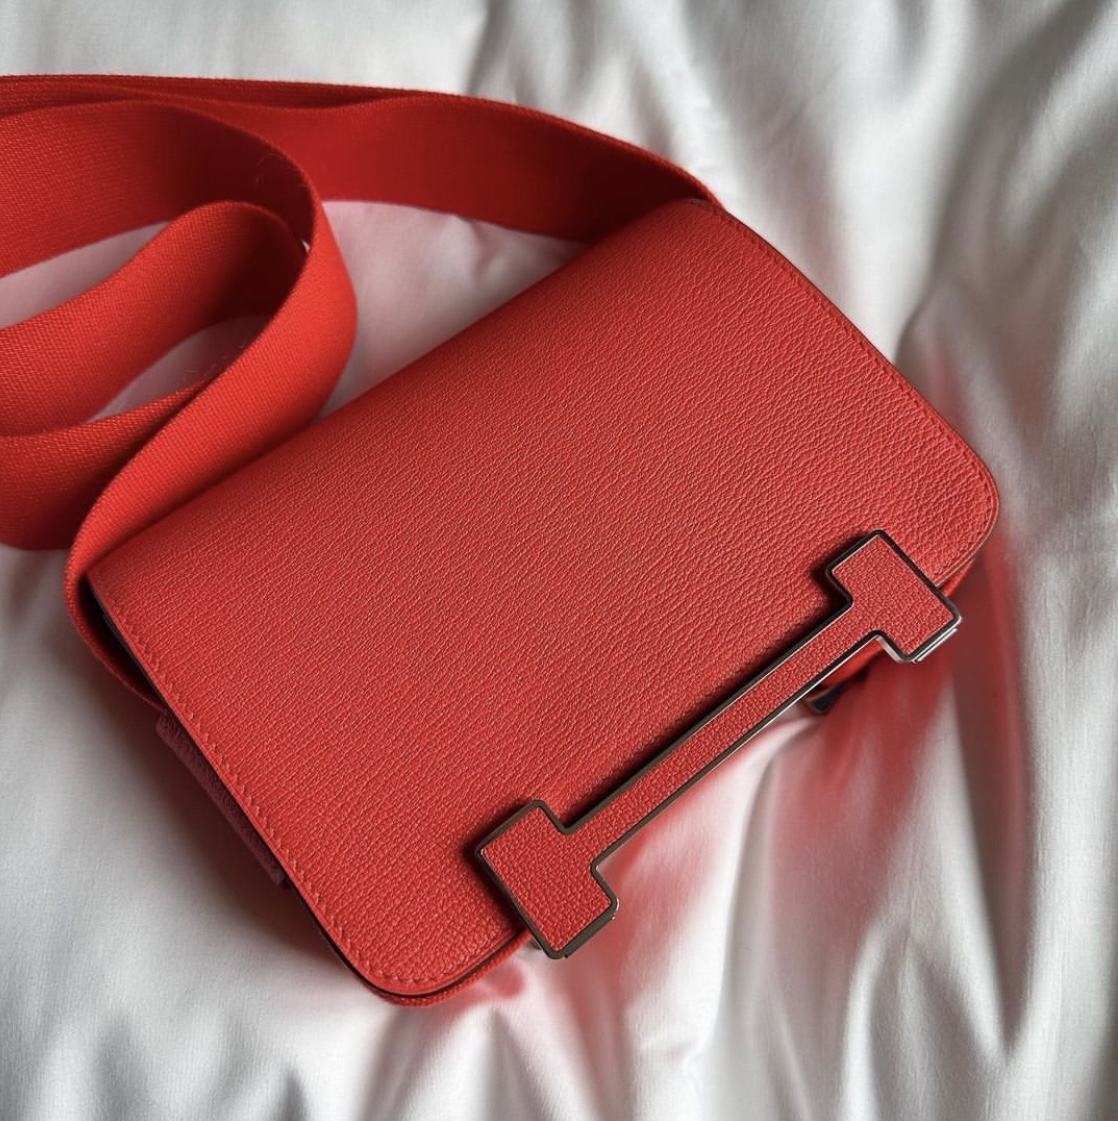 Why the Hermès Mini Evelyne could become your new favourite bag